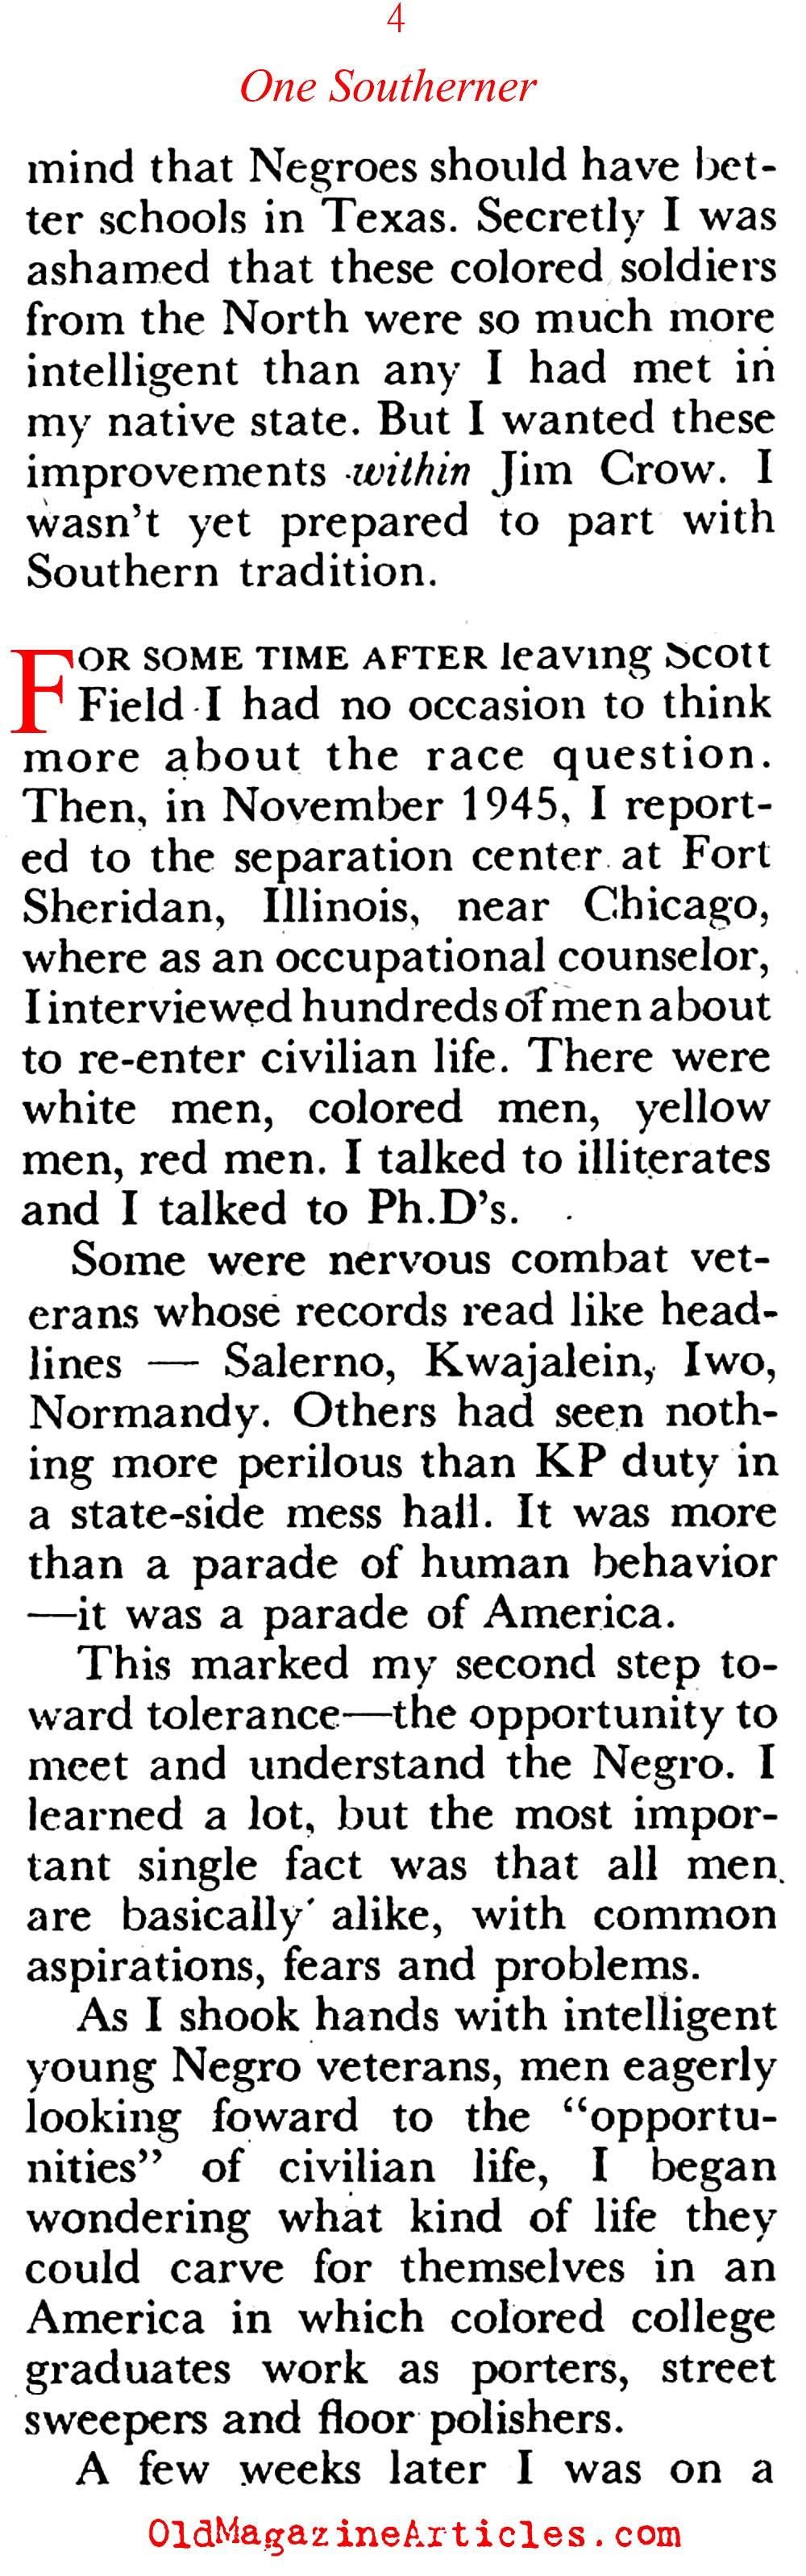 How One Southerner Overcame His Racist Attitudes  (Coronet Magazine, 1948)